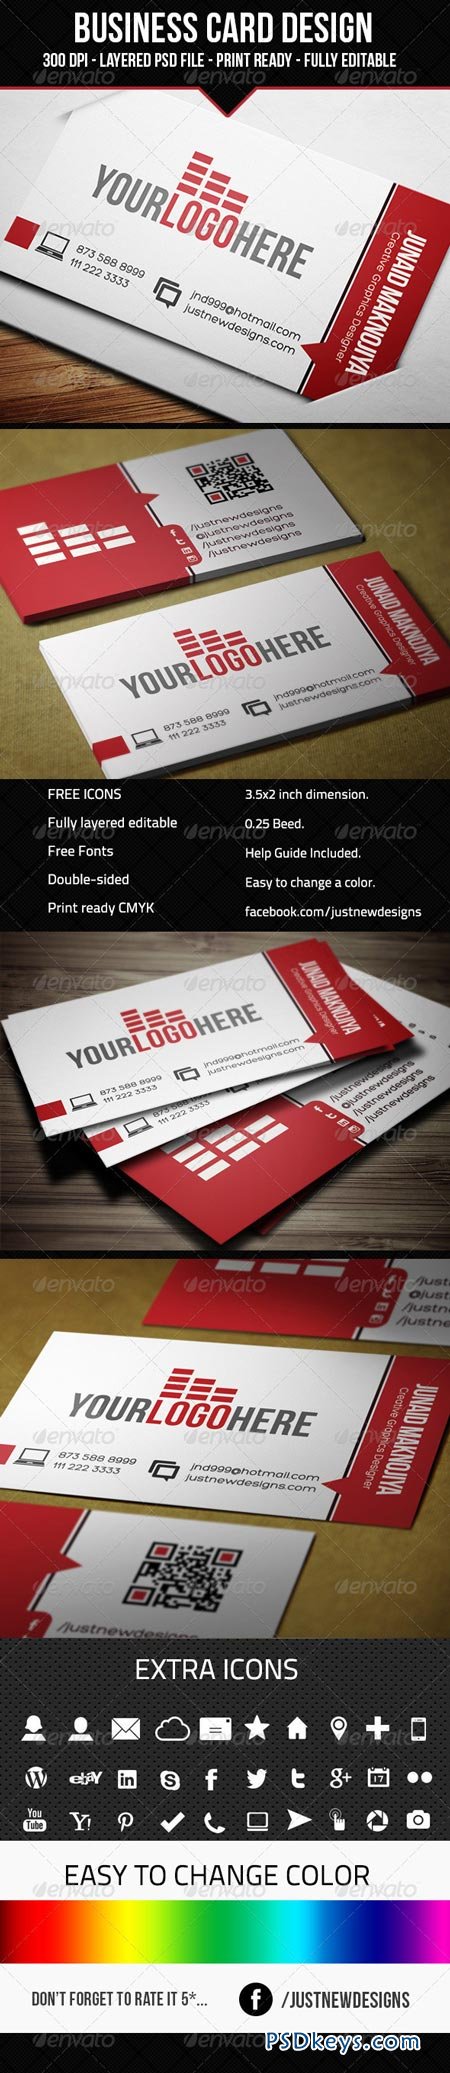 Corporate Business Card for Multipurpose 05 6950705